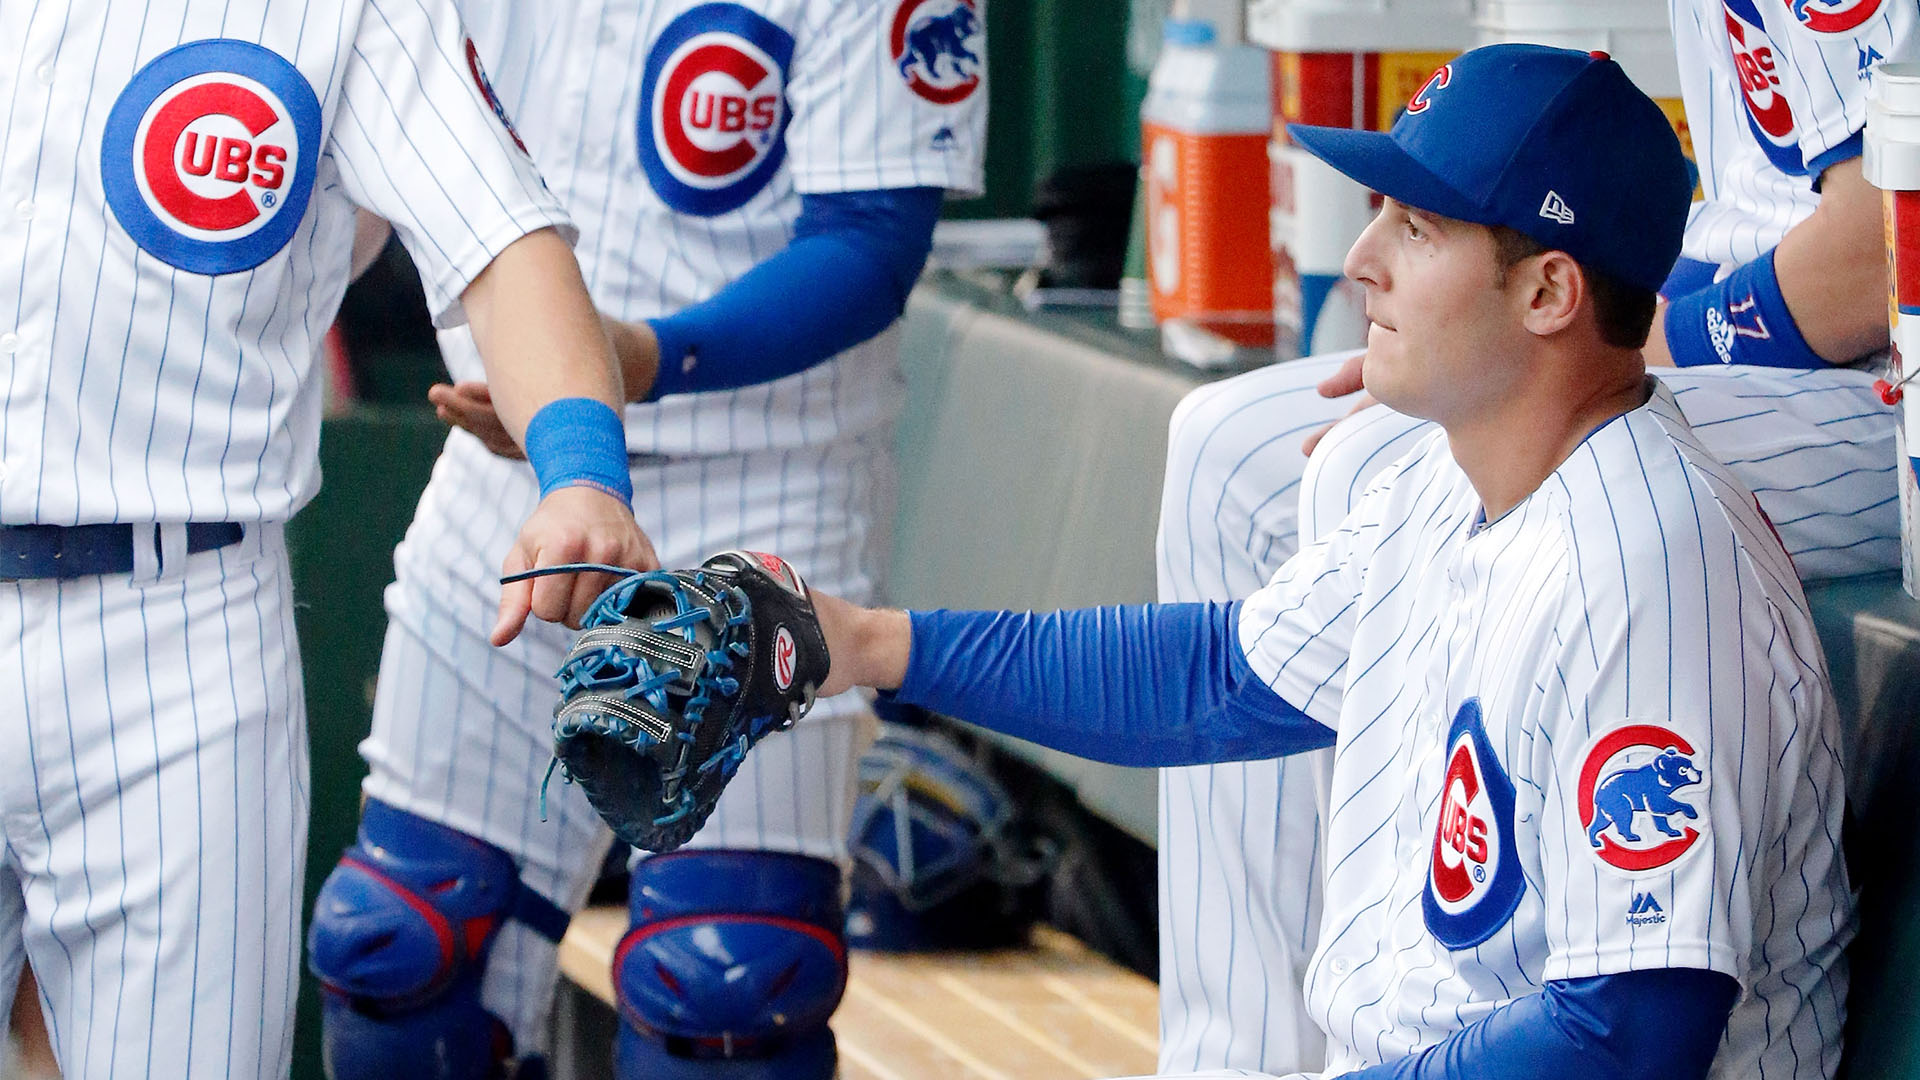 Brush up on your Cubs trivia with these Anthony Rizzo facts – NBC